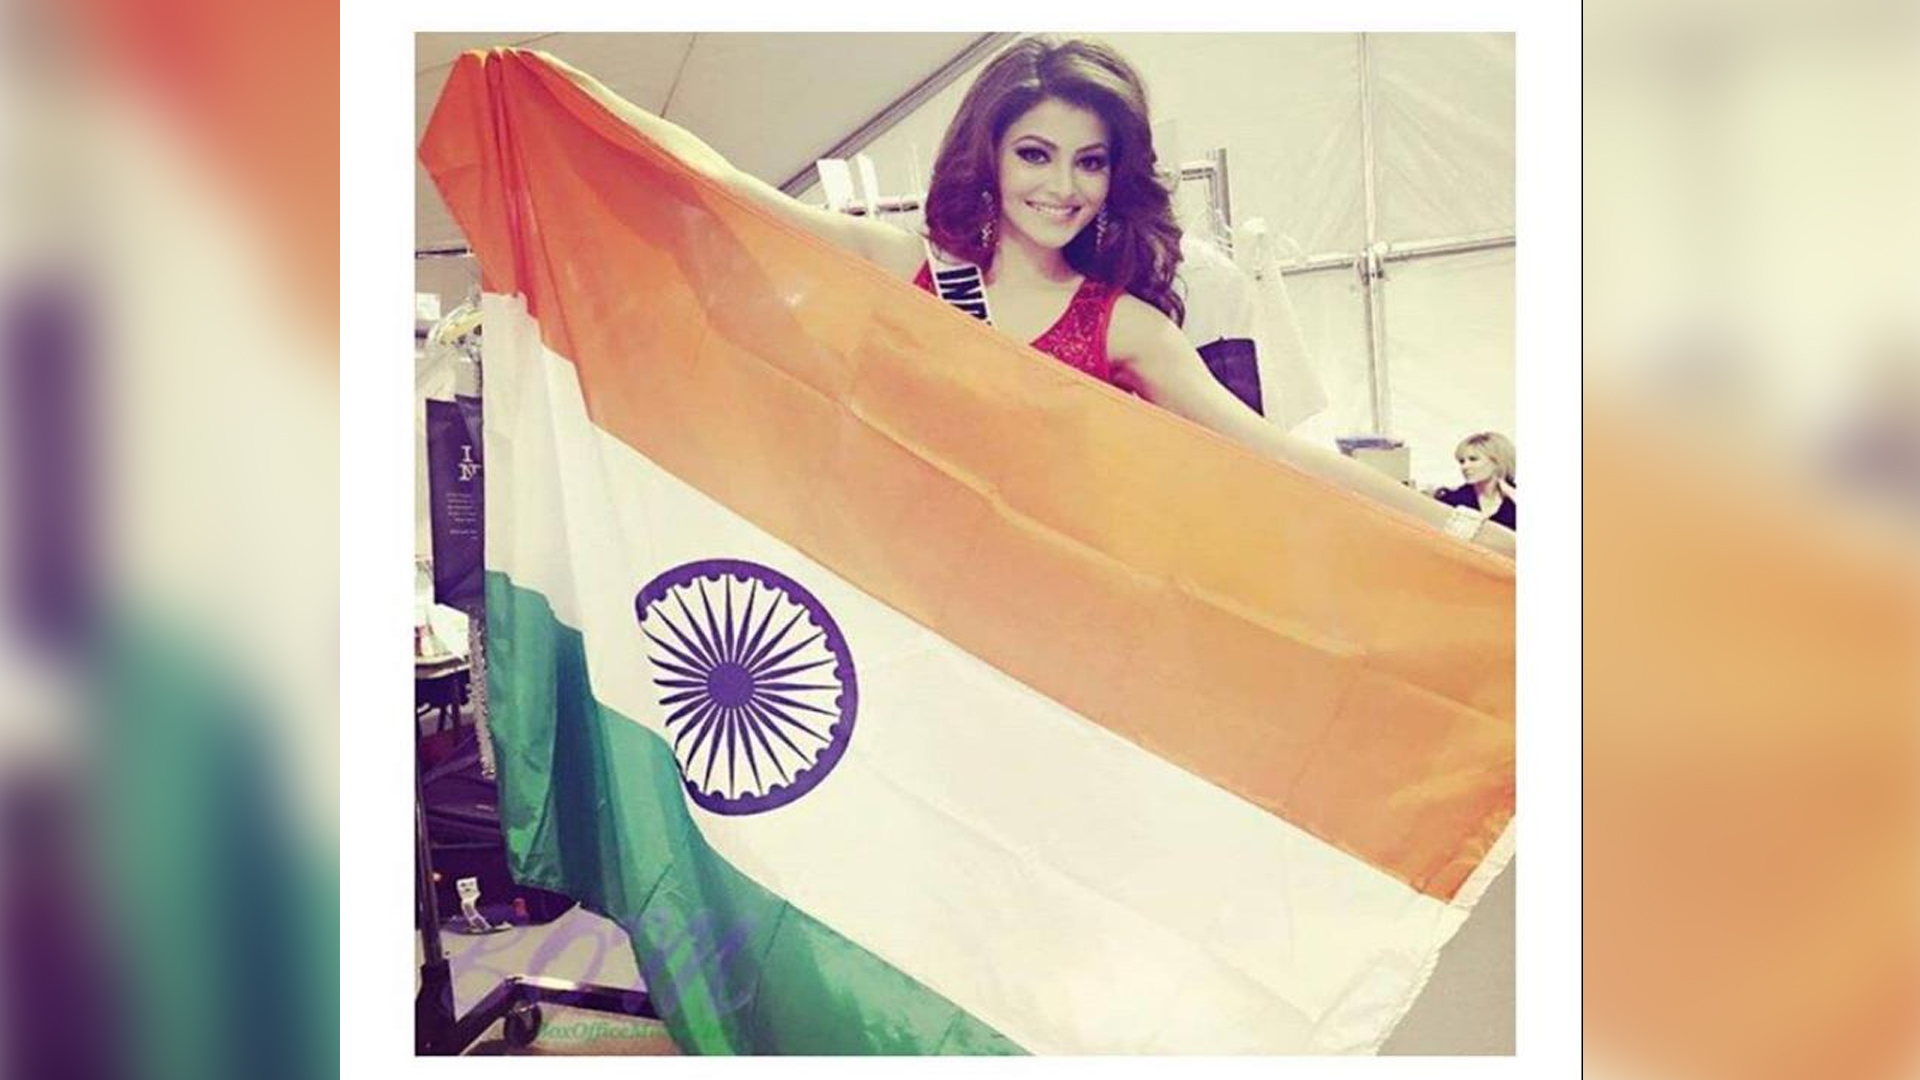 I’ve Represented My country and I’m a proud Indian Citizen says Urvashi Rautela